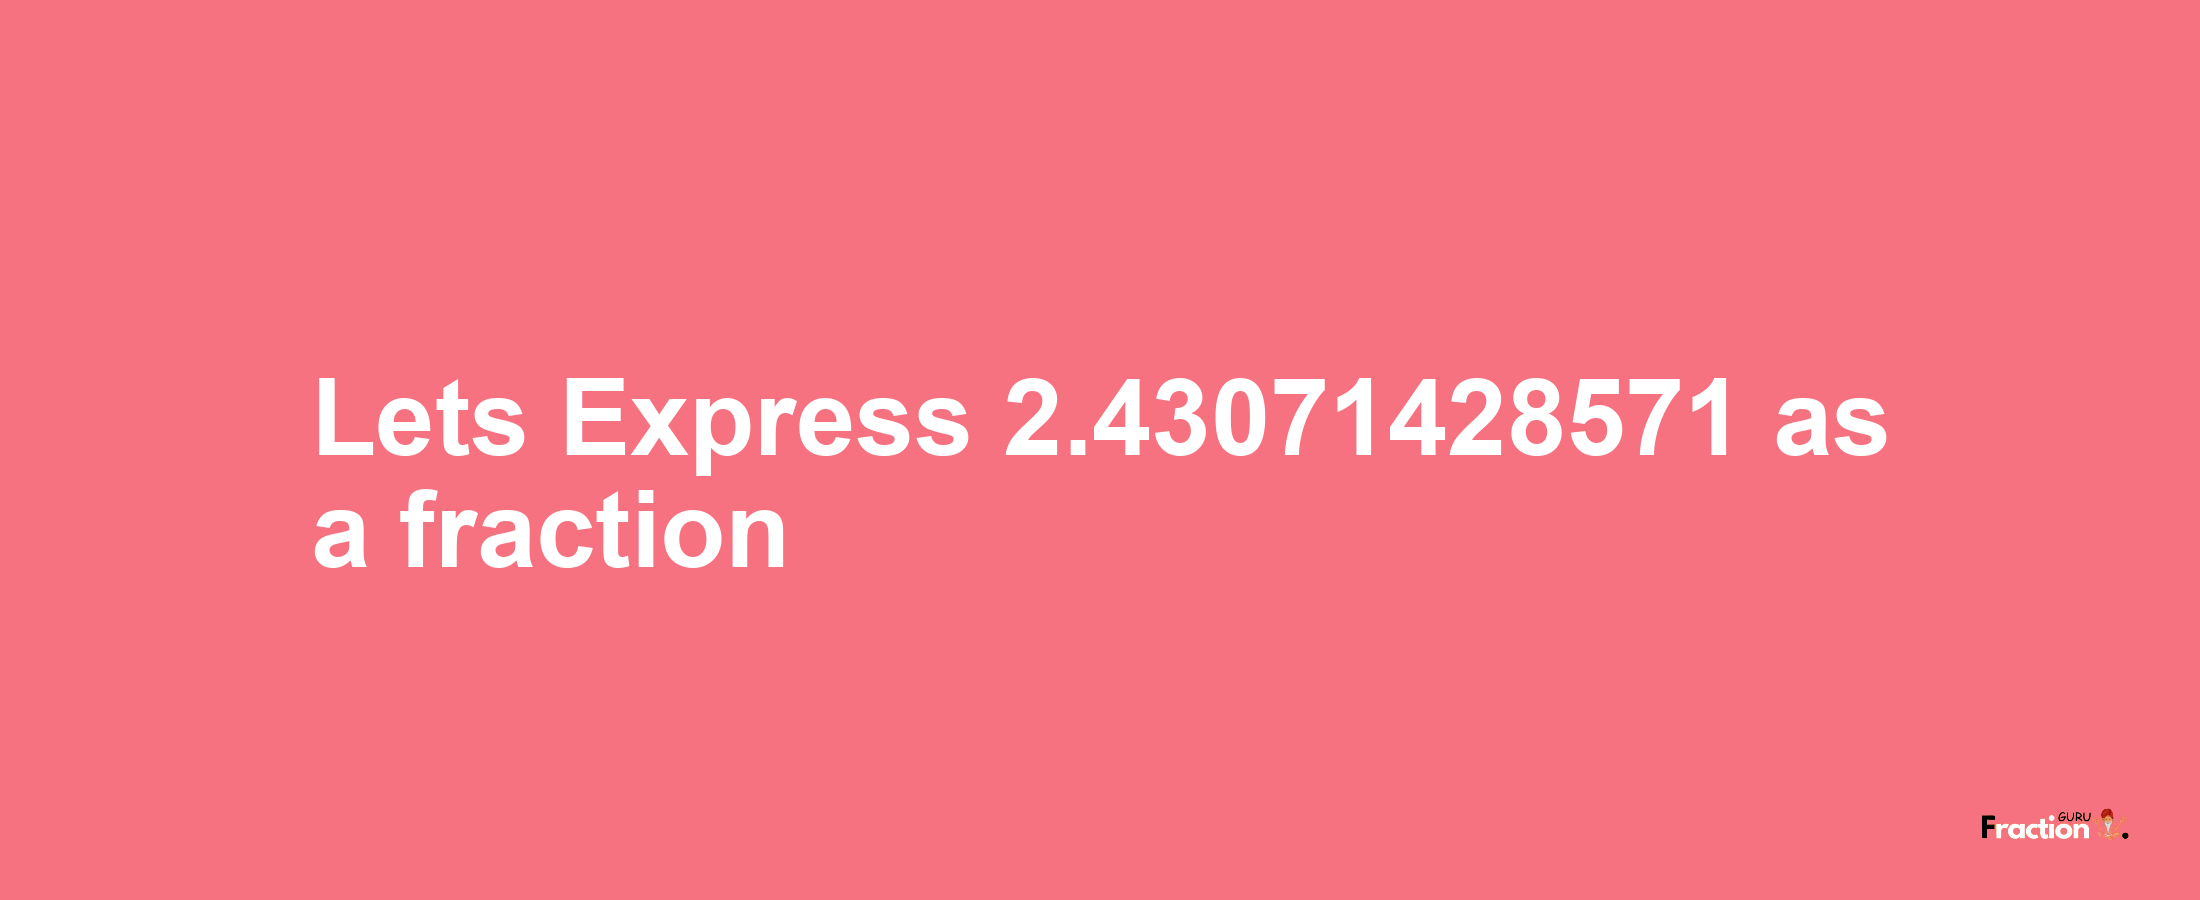 Lets Express 2.43071428571 as afraction